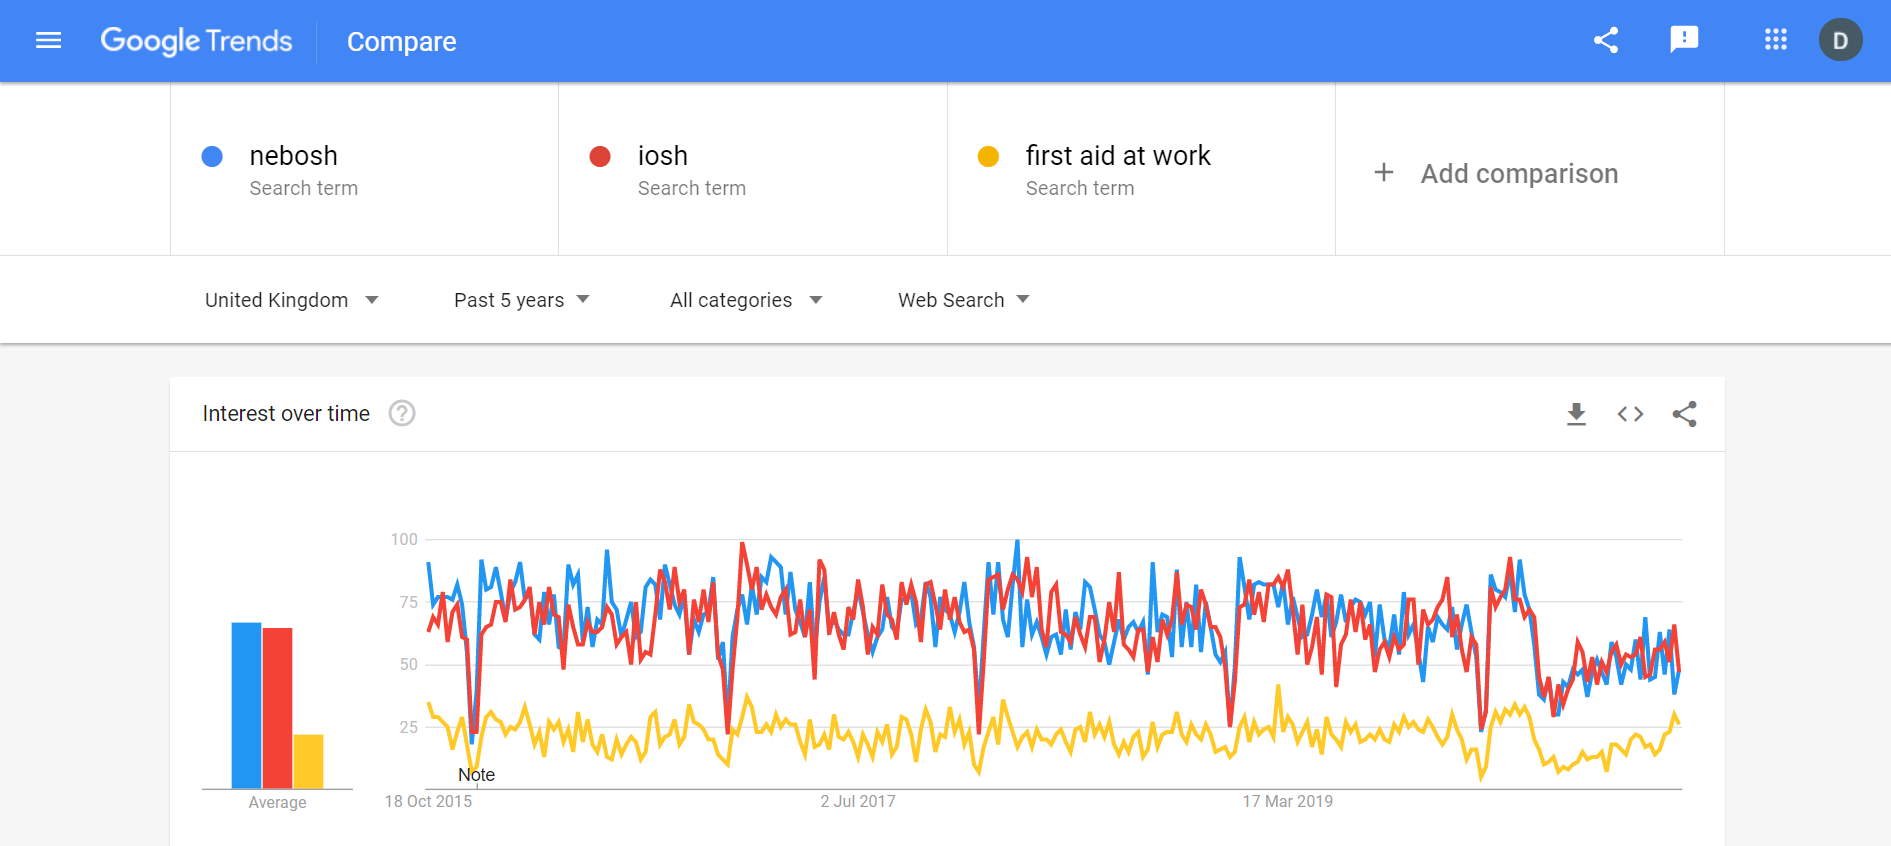 google trends for nebosh iosh and first aid at work